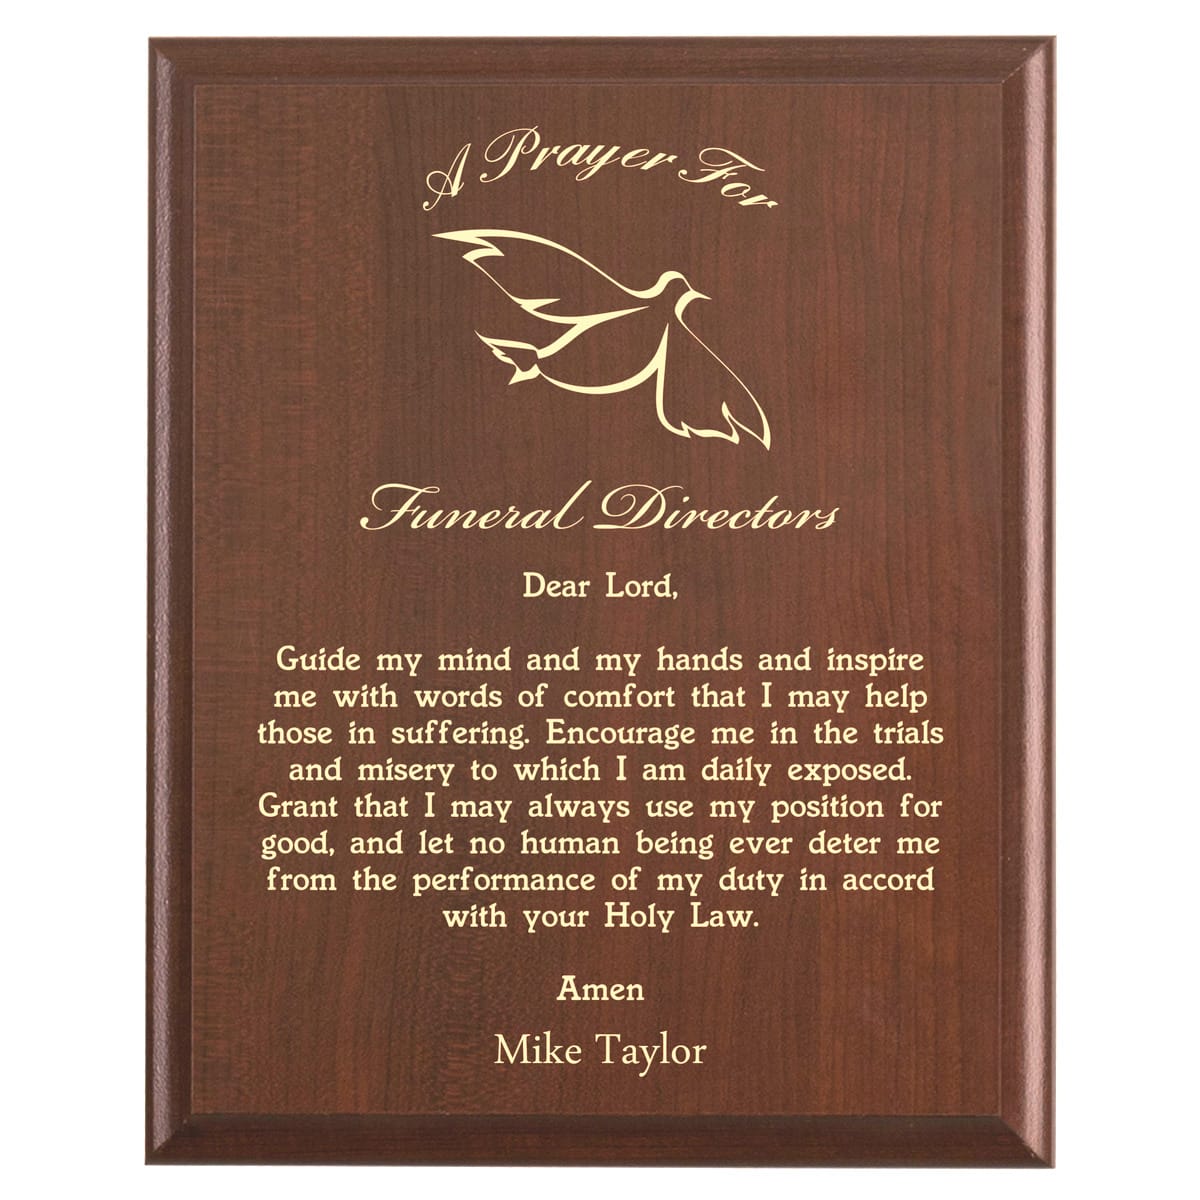 Plaque photo: Funeral Director Prayer Plaque design with free personalization. Wood style finish with customized text.